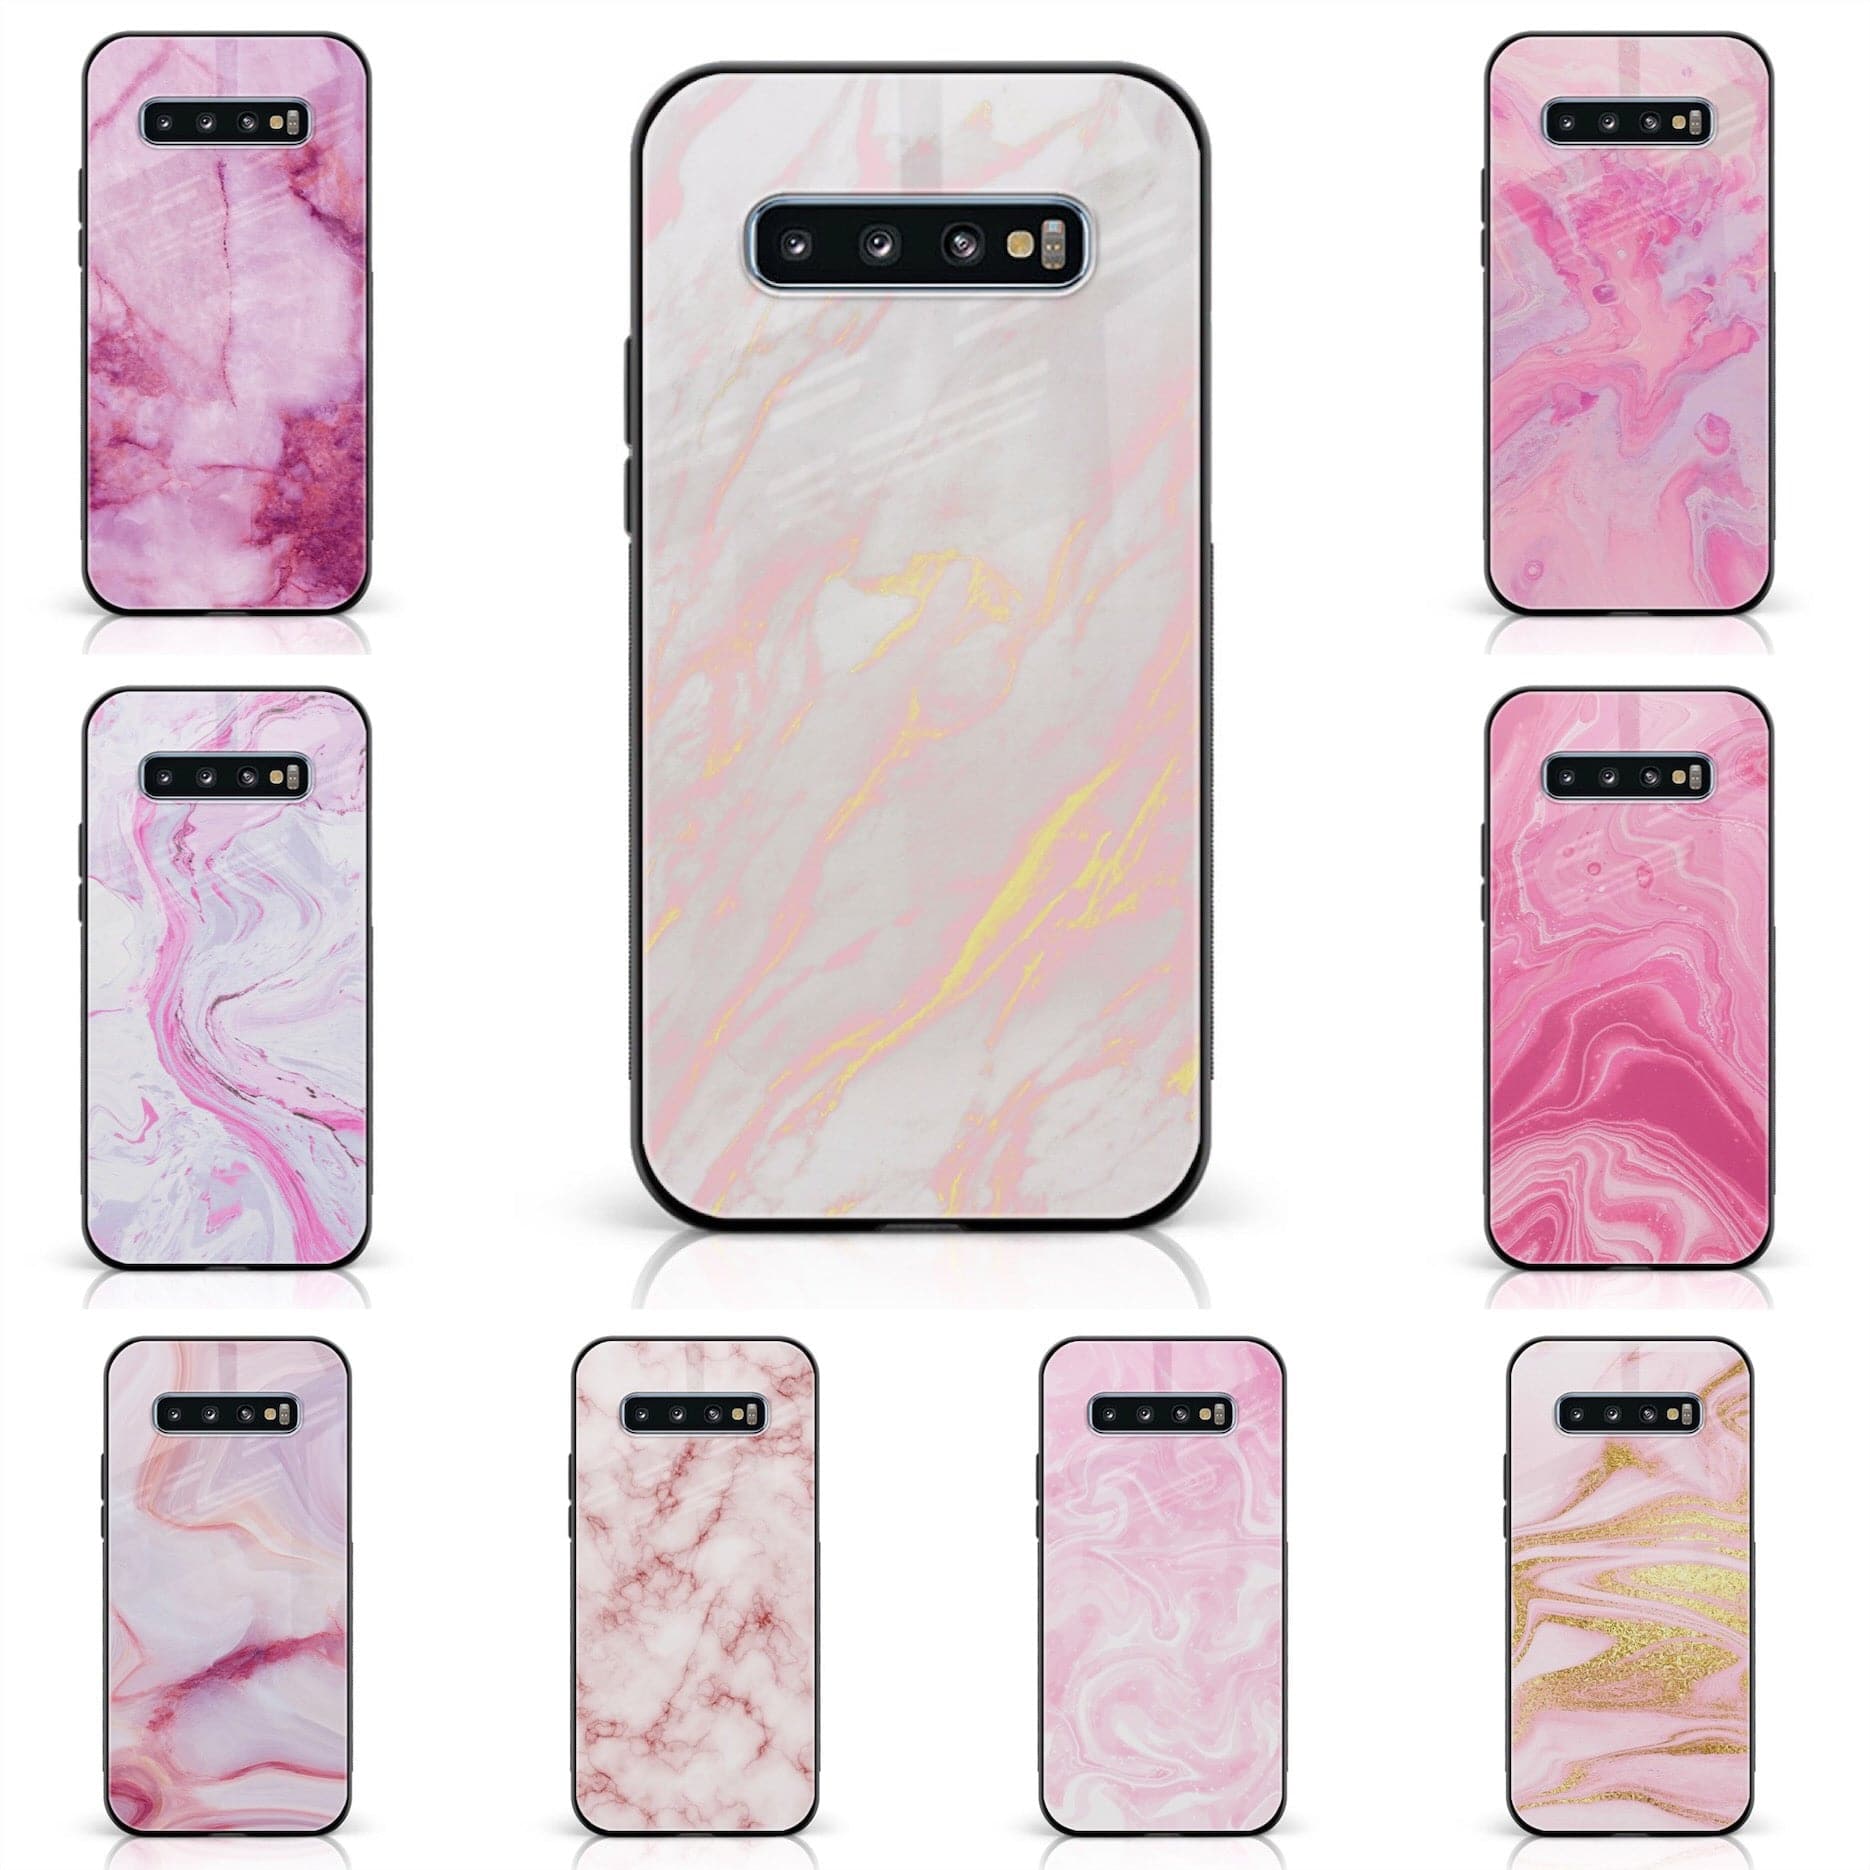 Galaxy S10 Plus - Pink Marble Series - Premium Printed Glass soft Bumper shock Proof Case